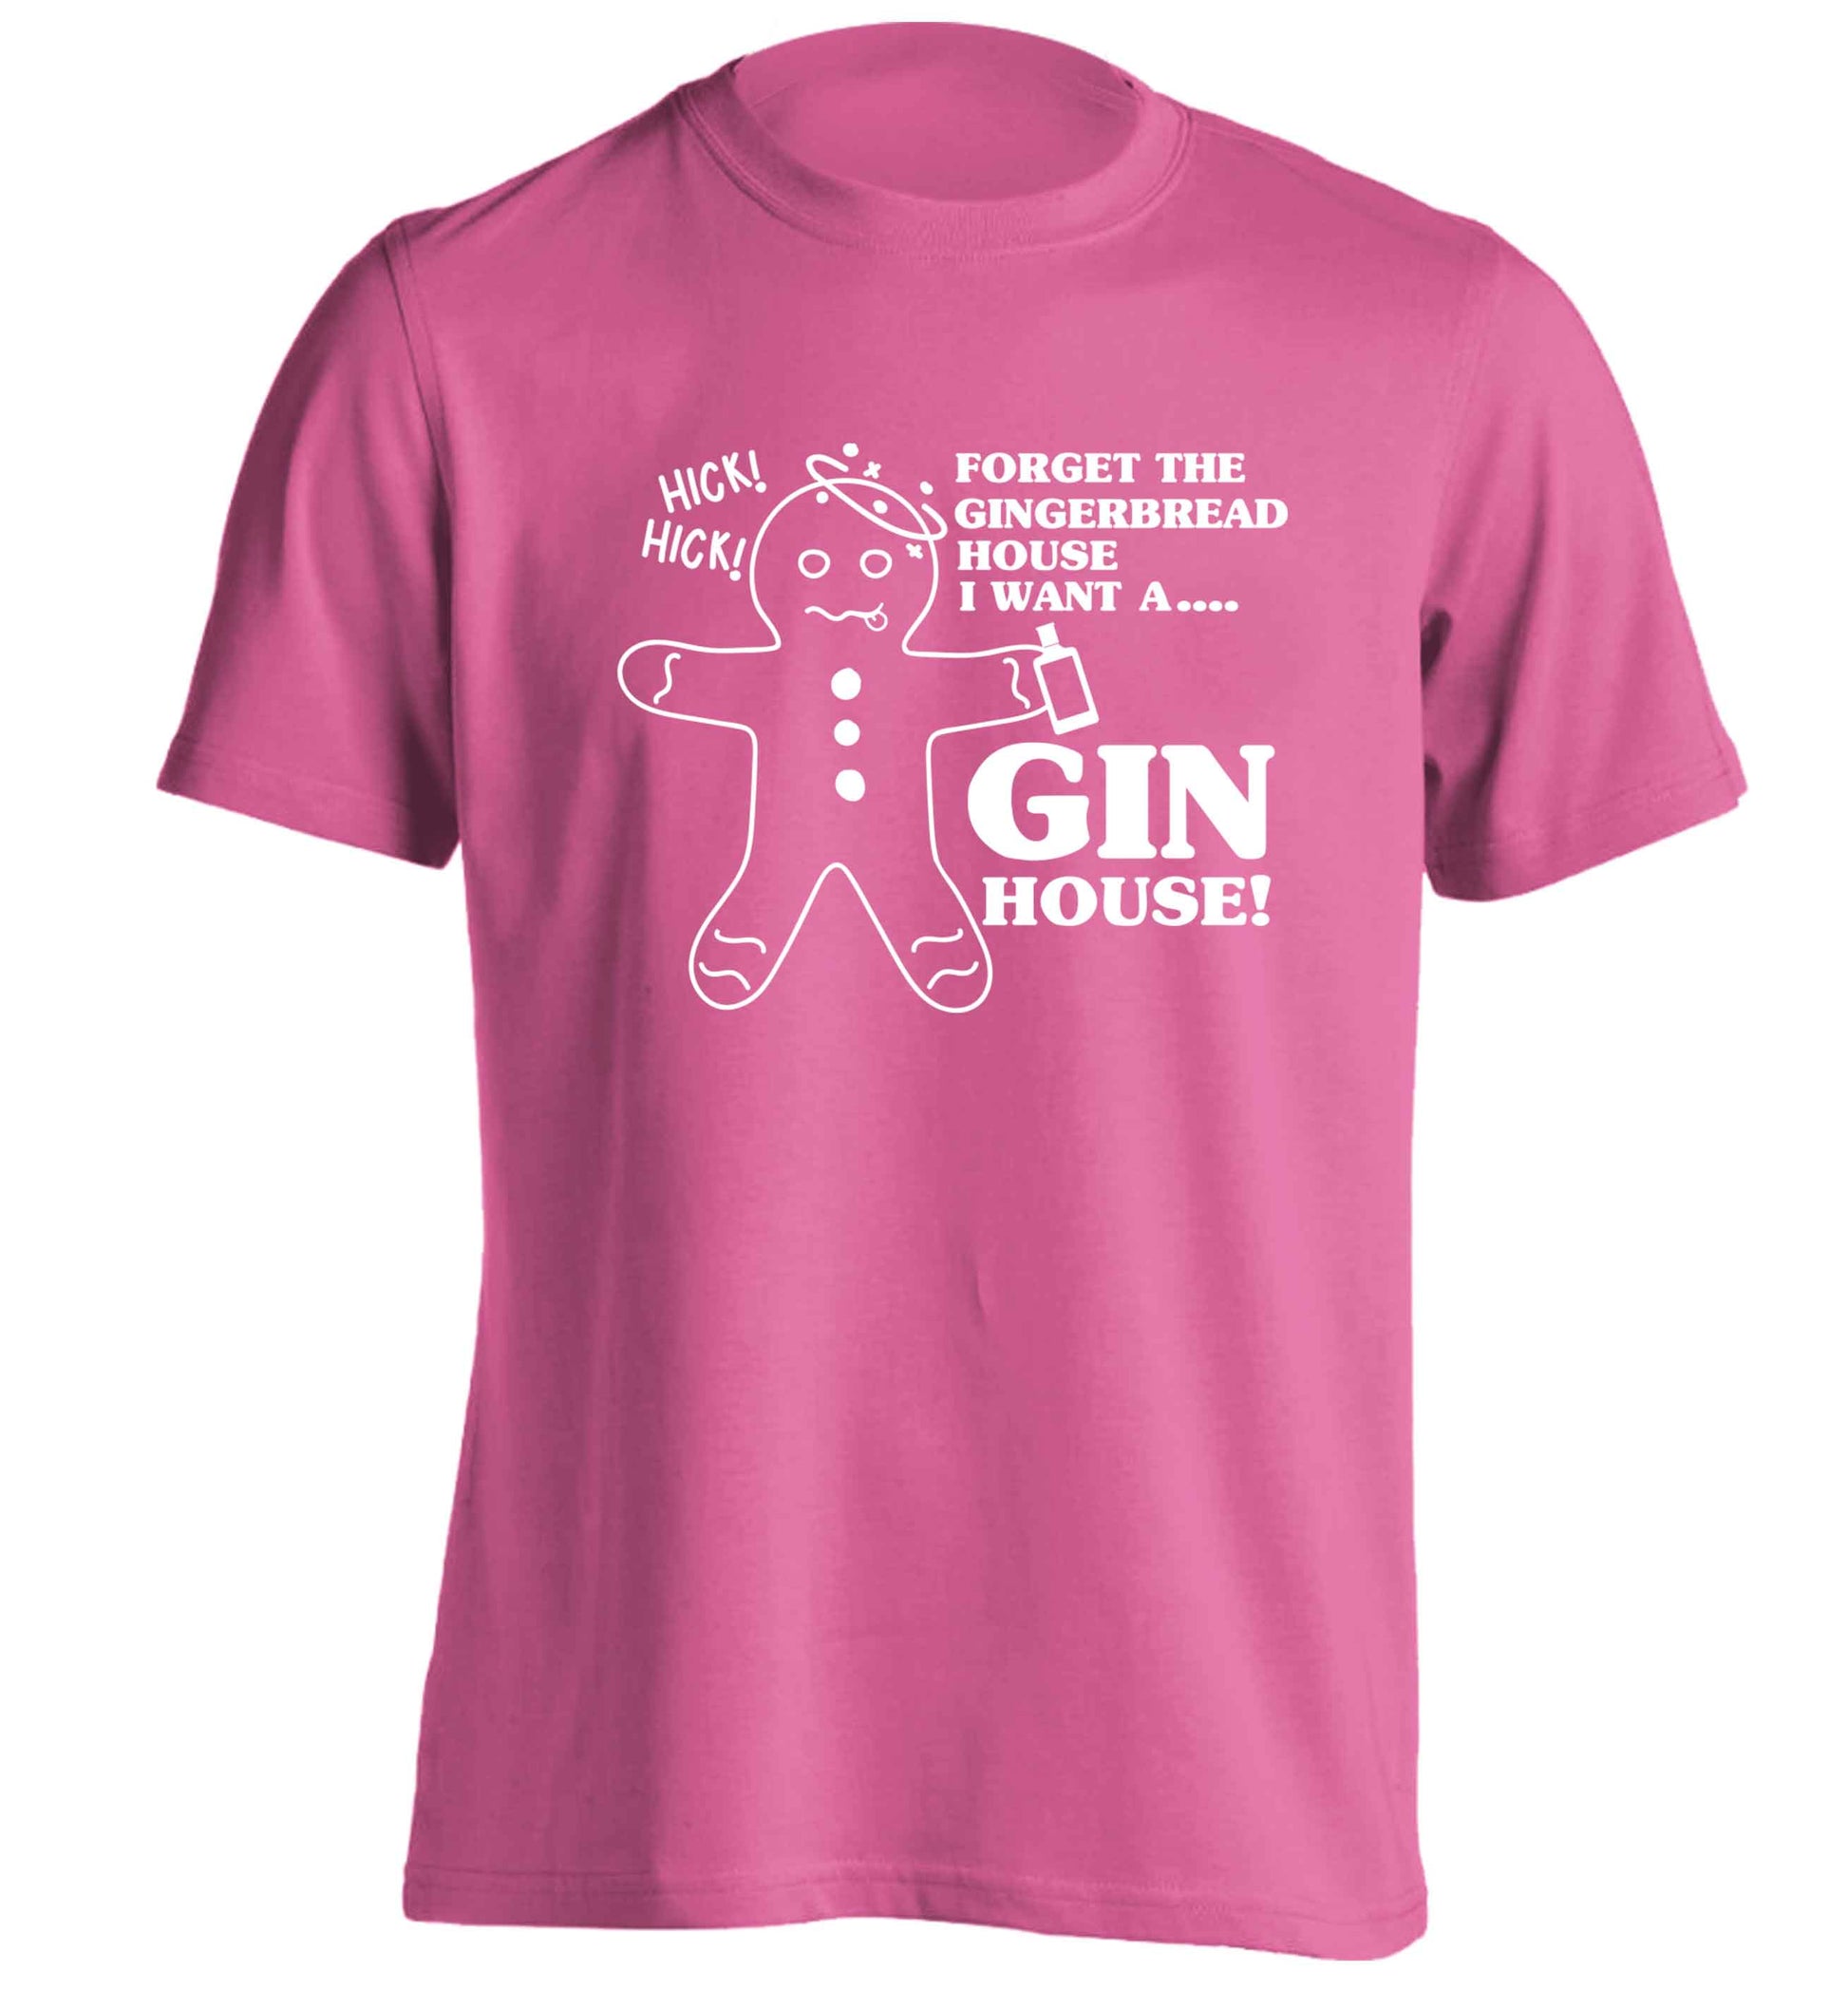 Forget the gingerbread house I want a gin house adults unisex pink Tshirt 2XL